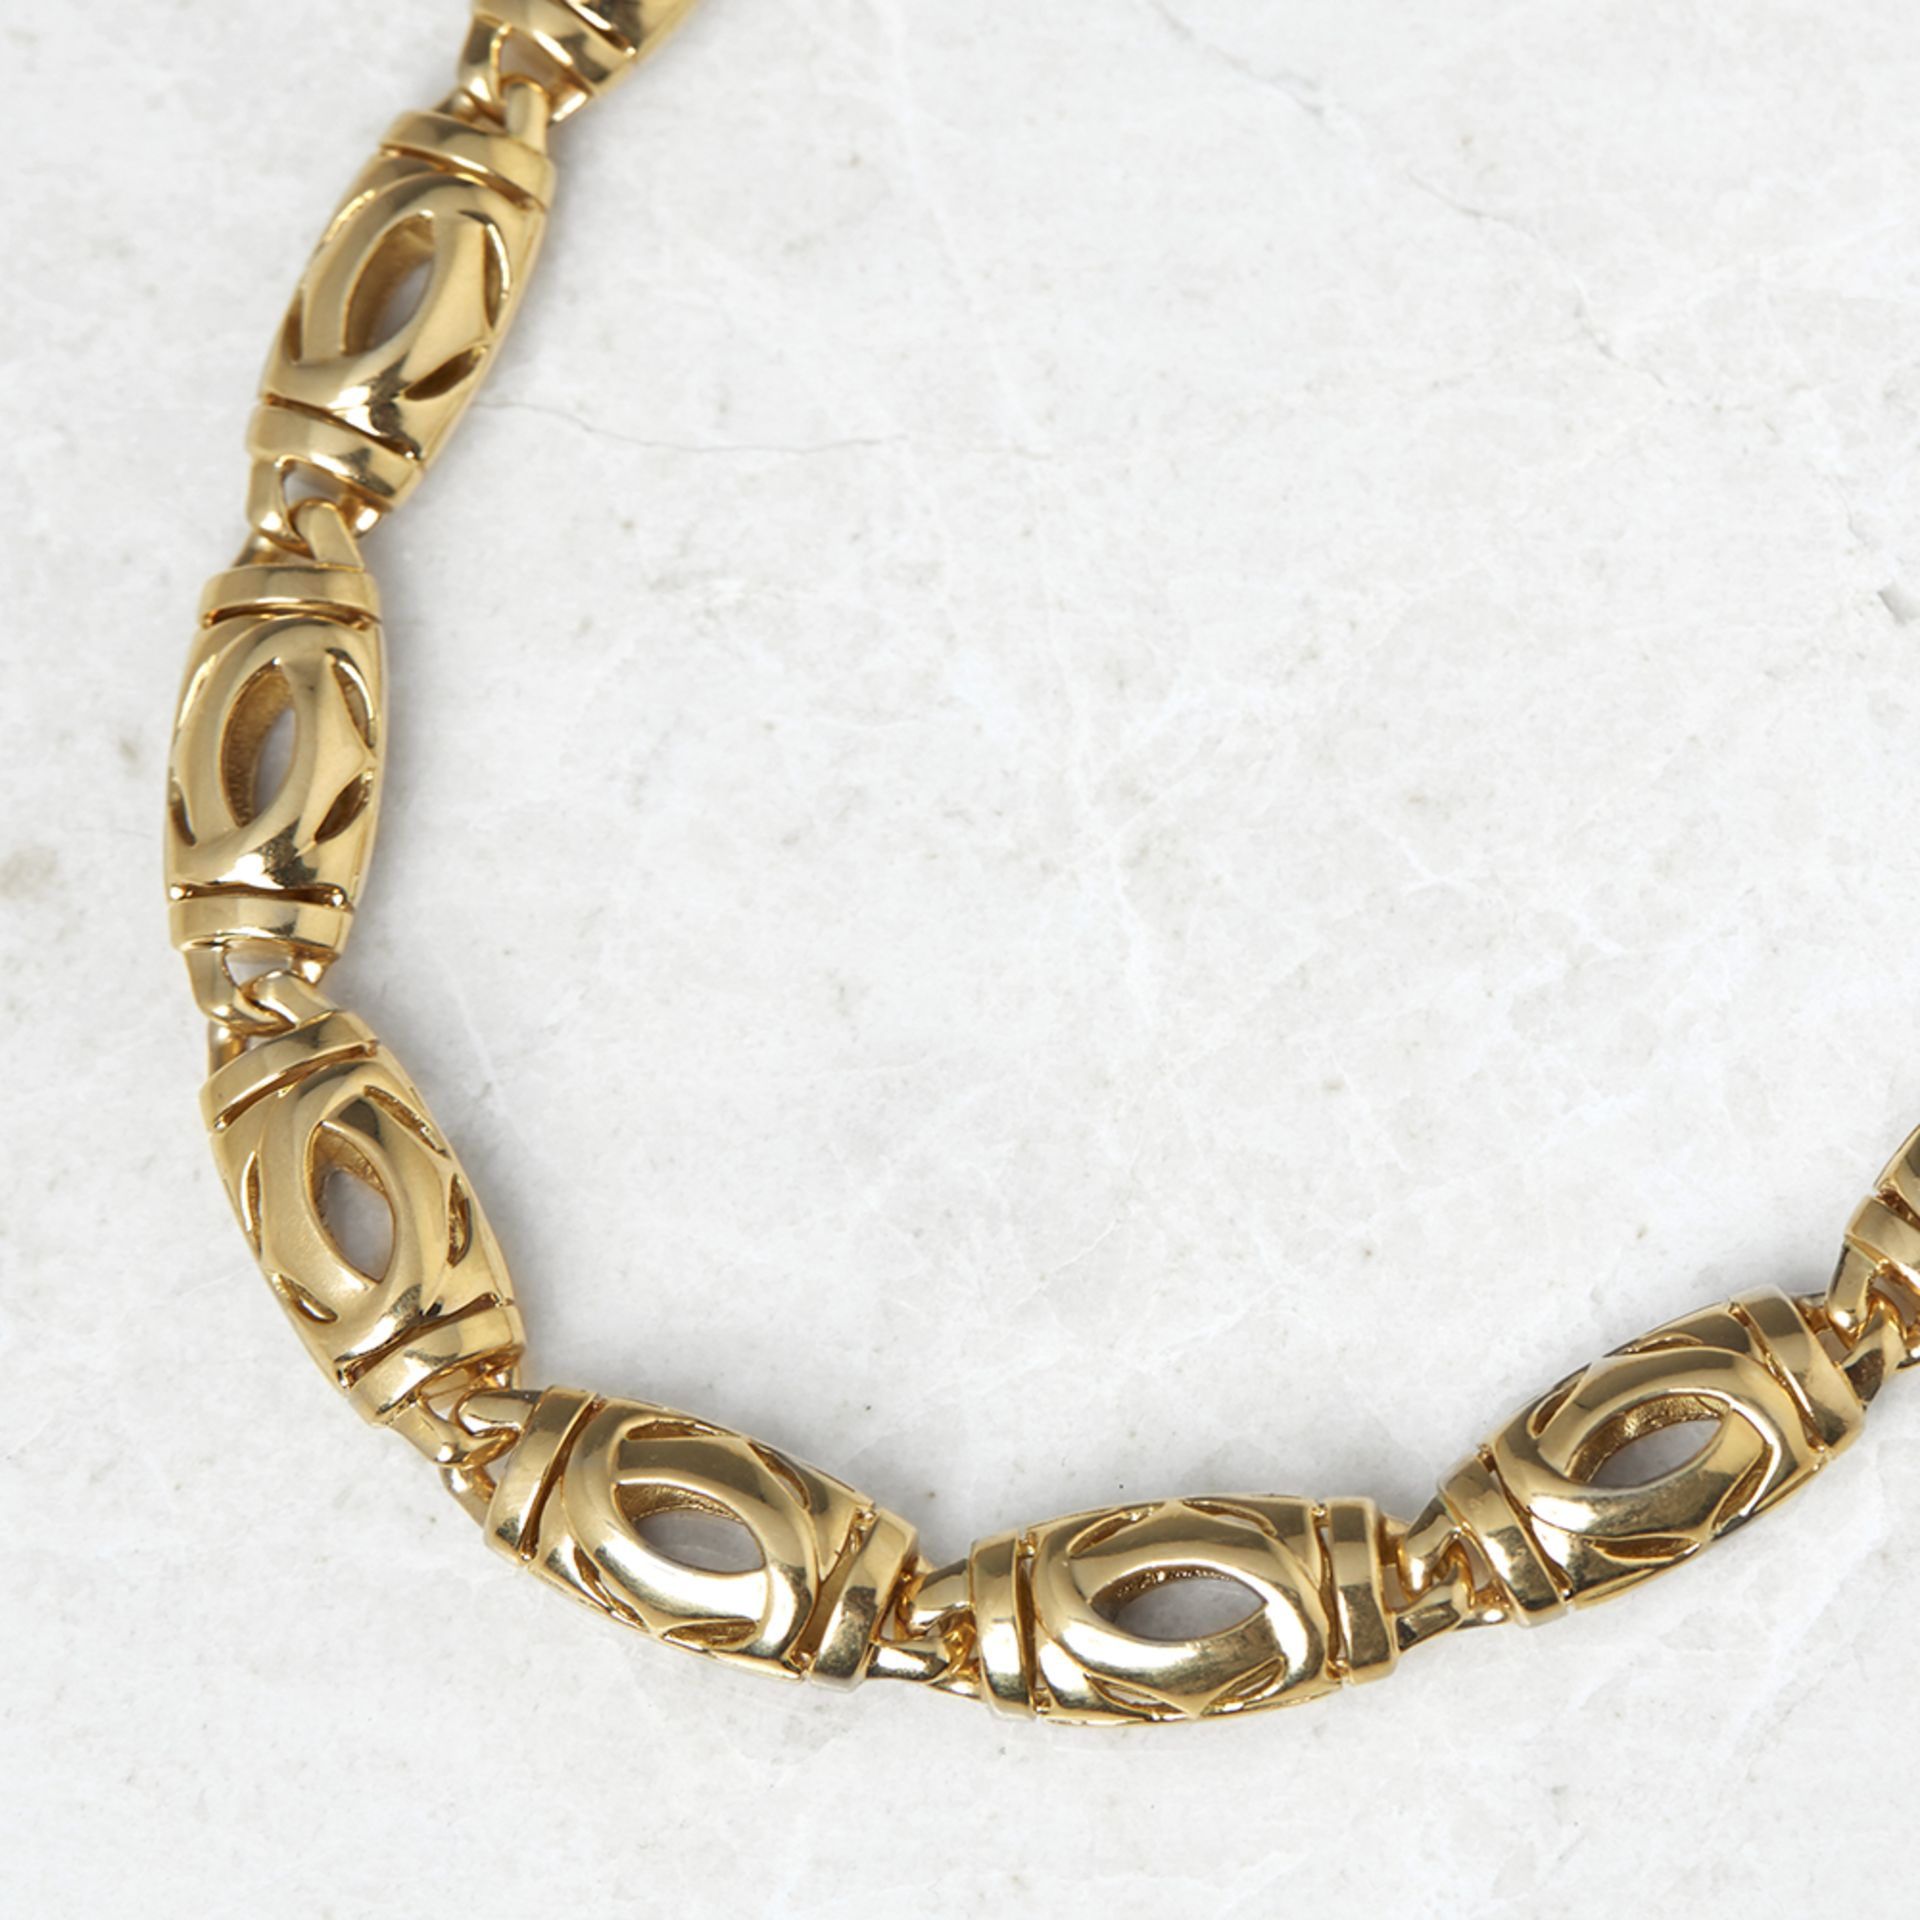 Cartier 18k Yellow Gold Double C Design Necklace - Image 2 of 6